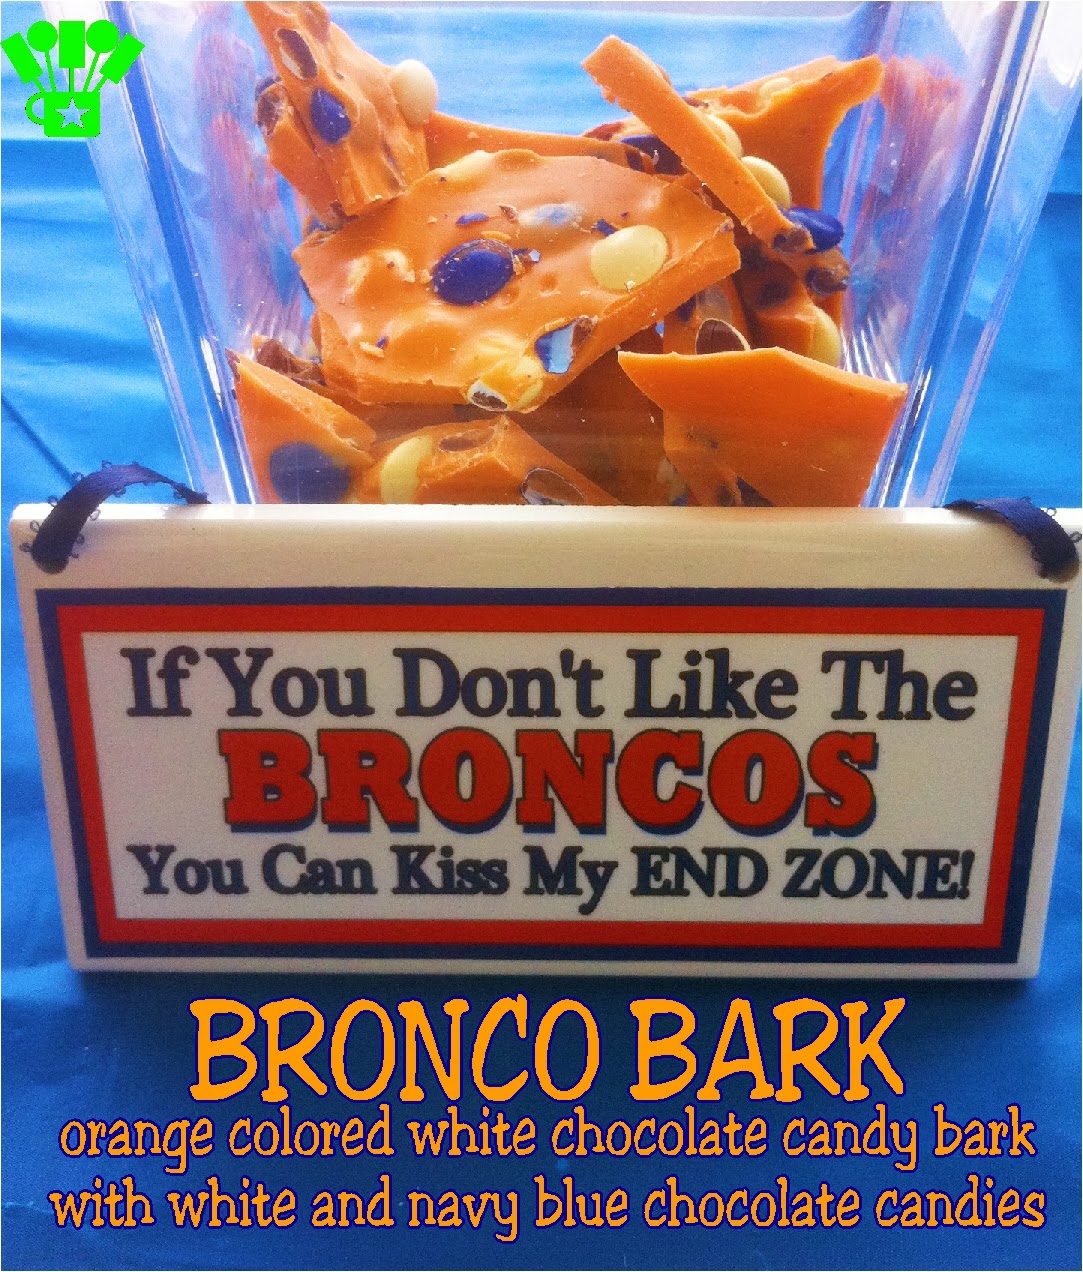 Denver Bronco Candy Bark. An orange colored white chocolate candy bark with white and navy blue chocolate candy pieces.  YUMMY! And great for cheering on the Broncos #Broncos #Candy #SuperBowl